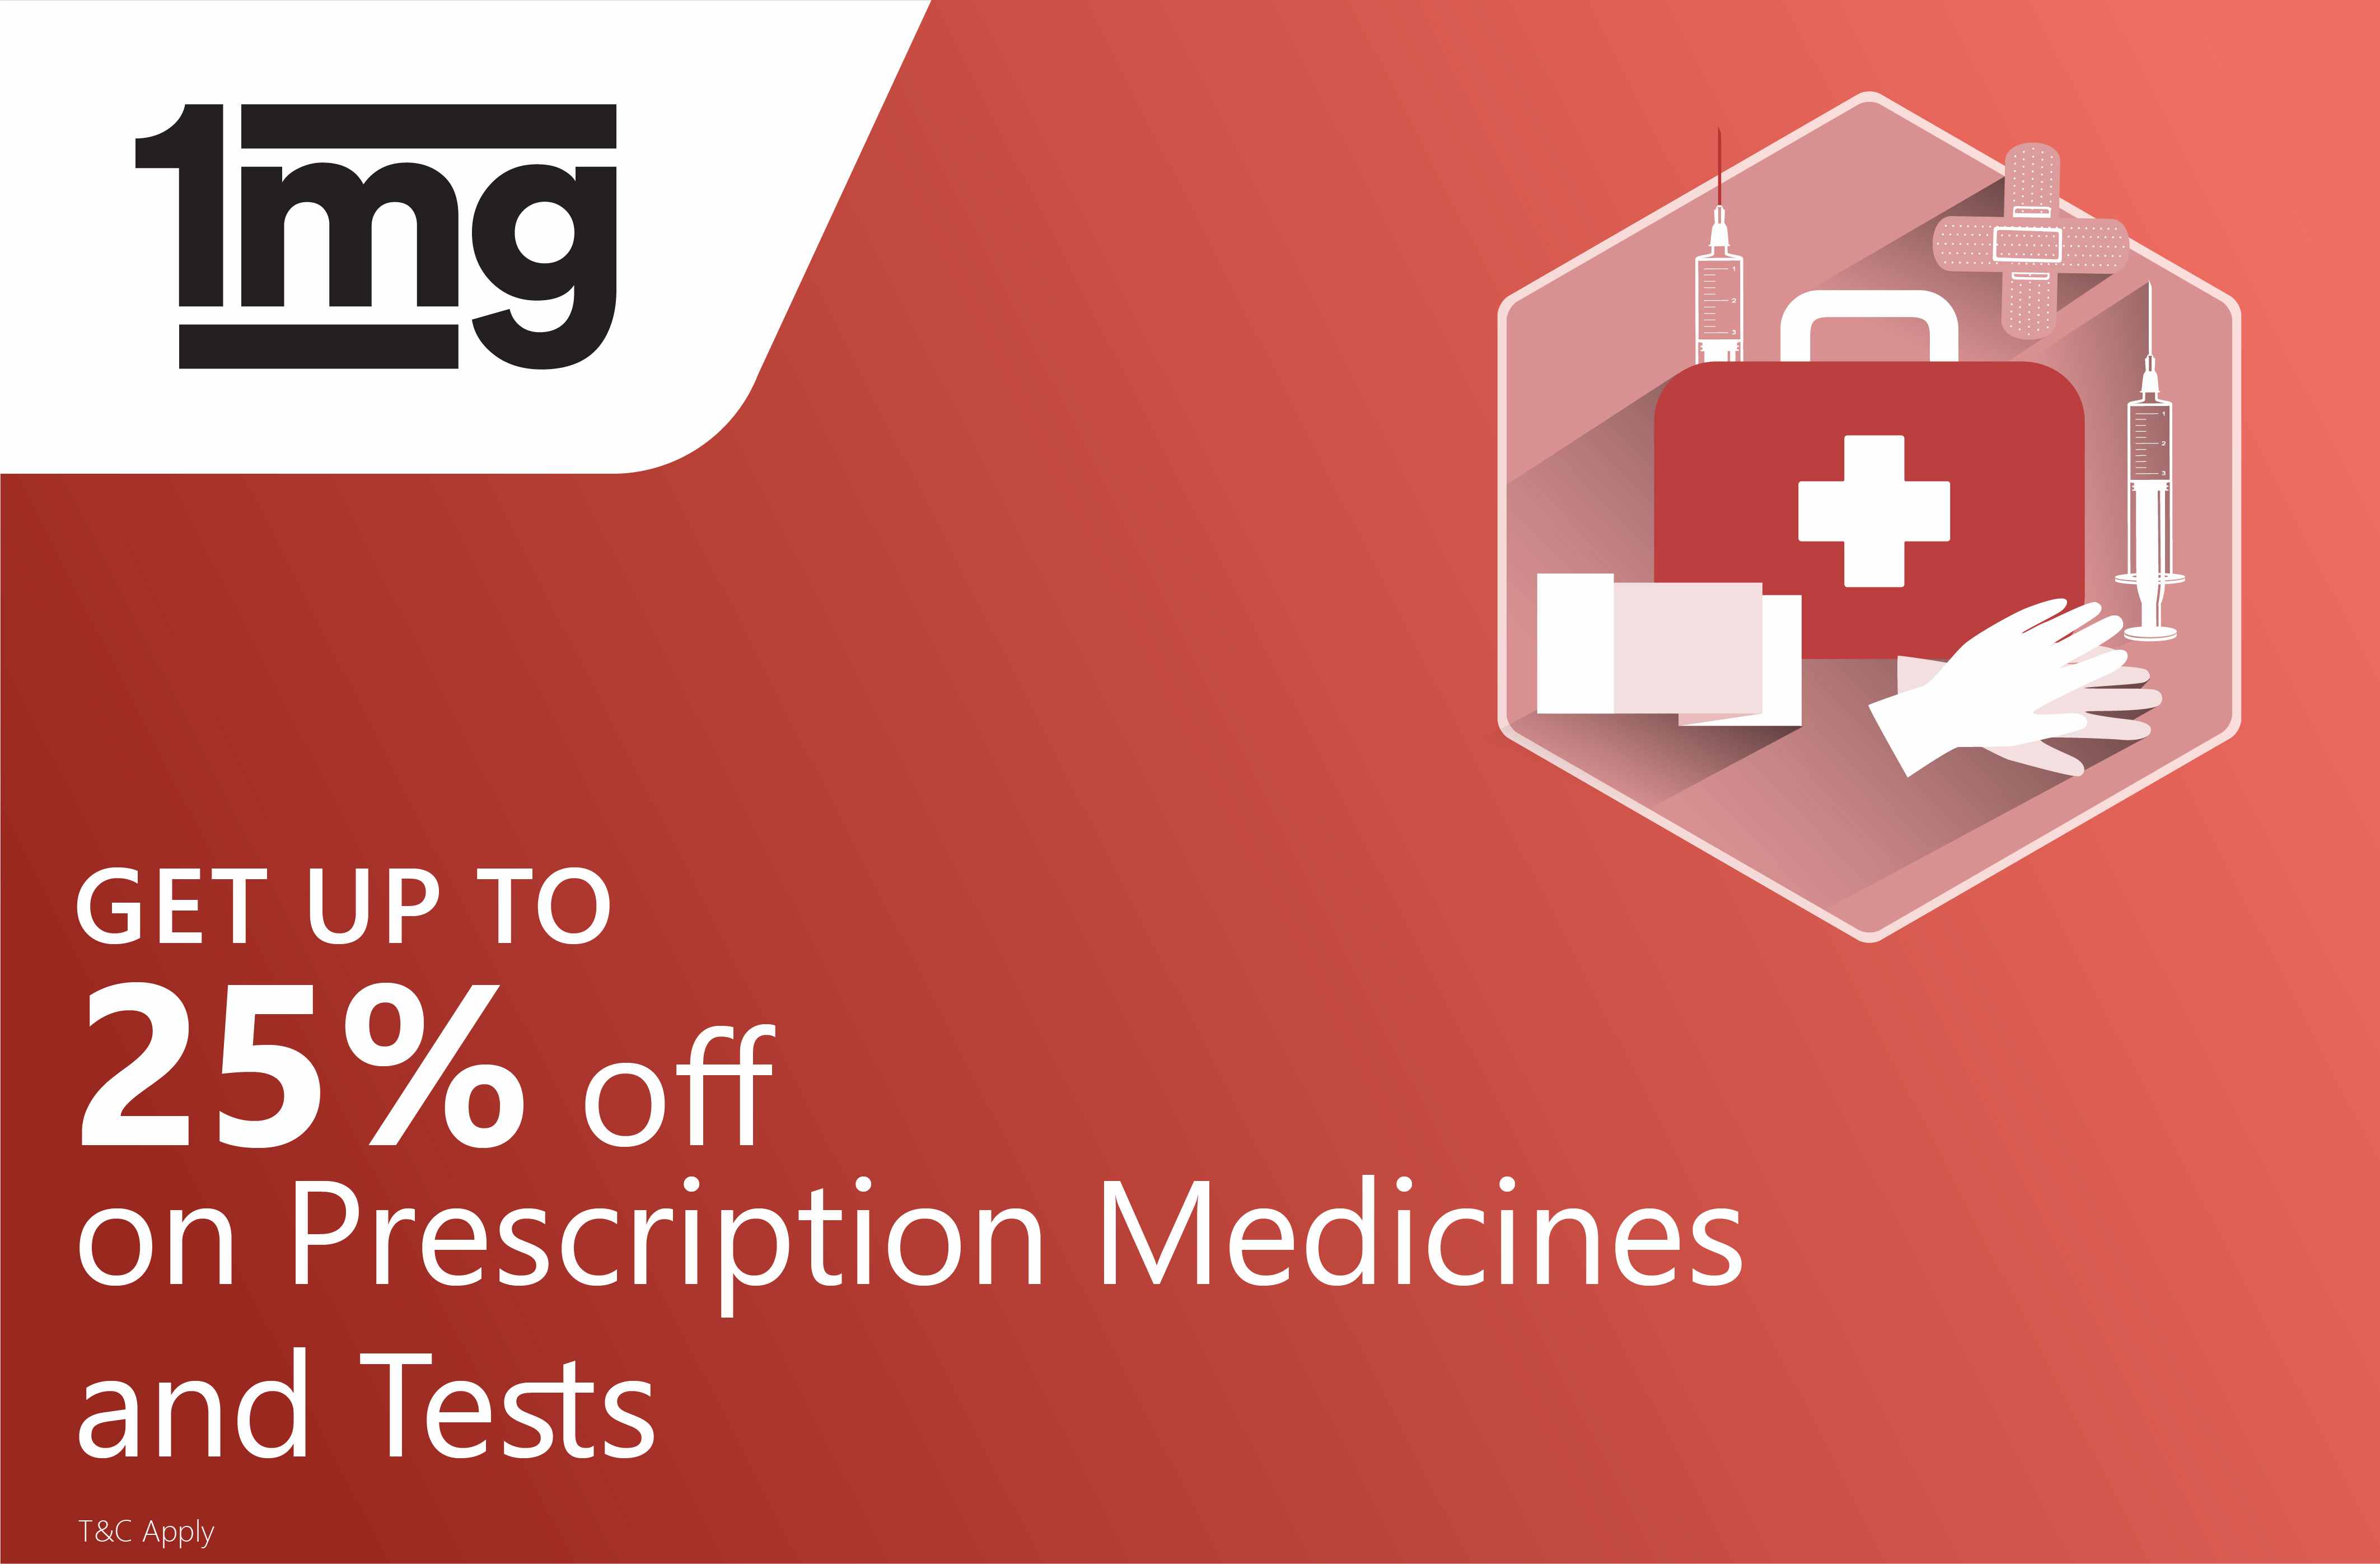 Up to 25% off on Medicines & Tests